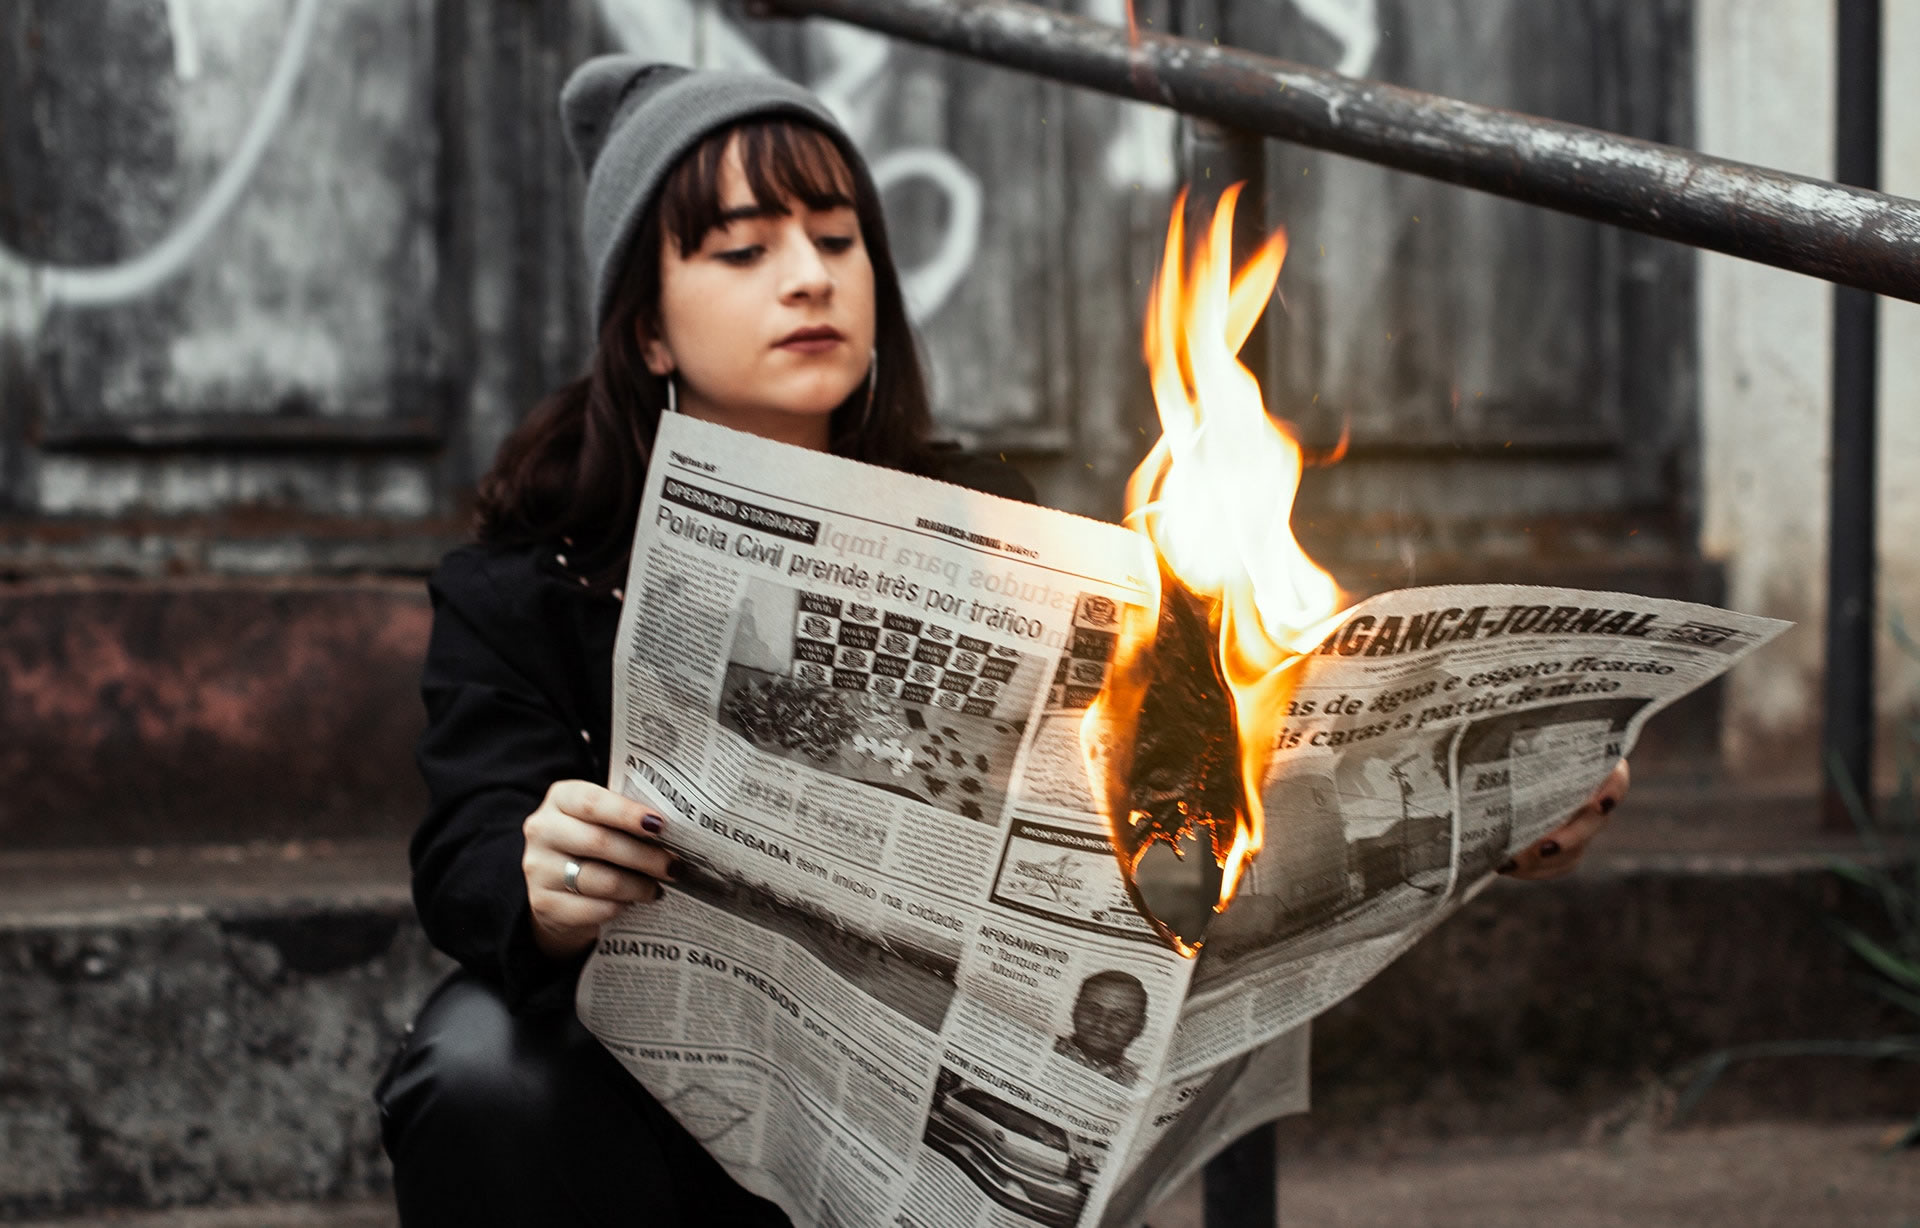 Woman reading a newspaper while the paper is on fire